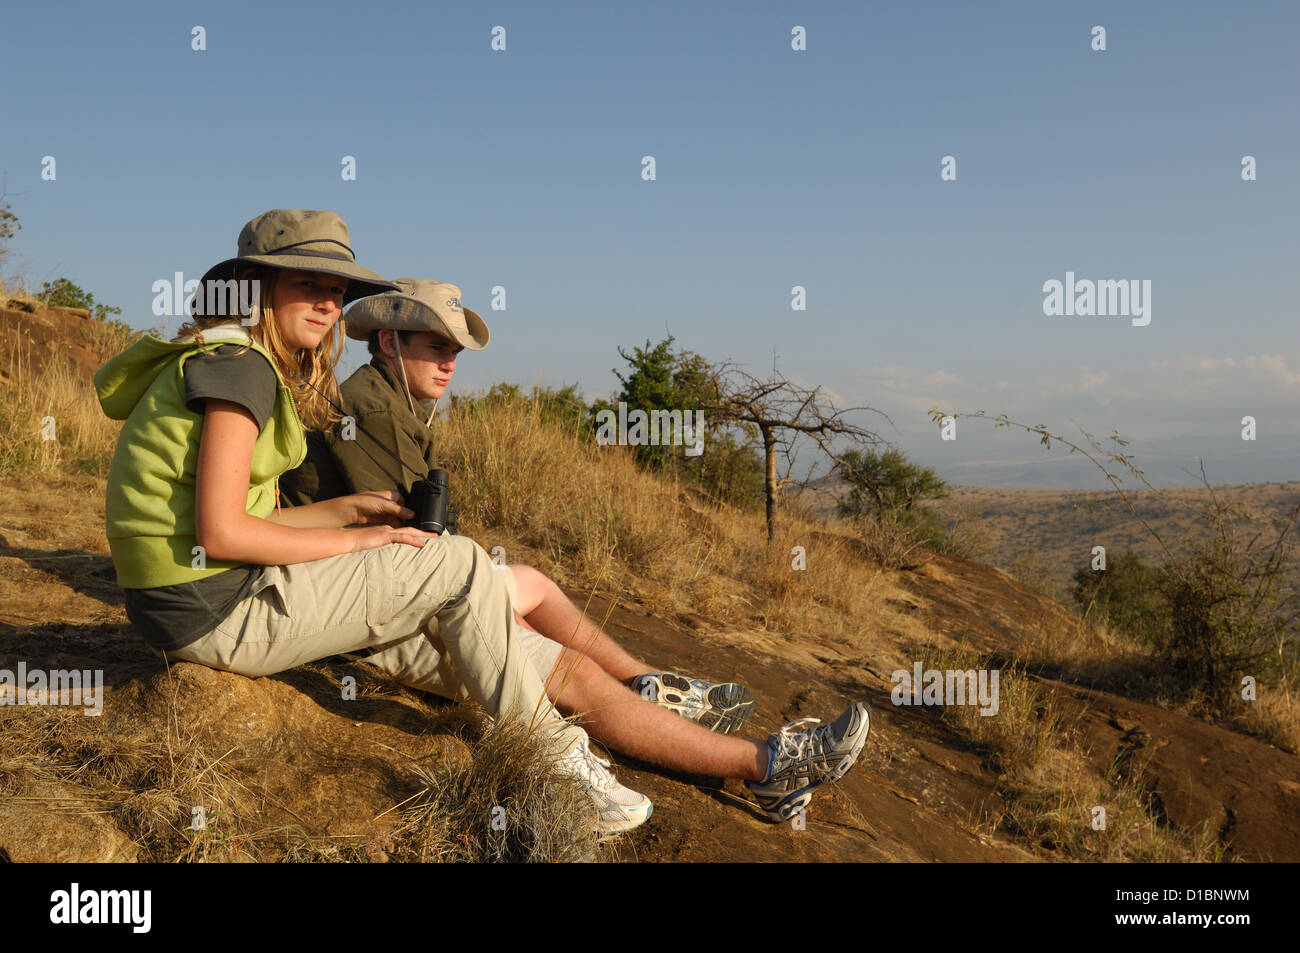 Tourists on an African game viewing safari at Lewa Downs Kenya Africa Stock Photo